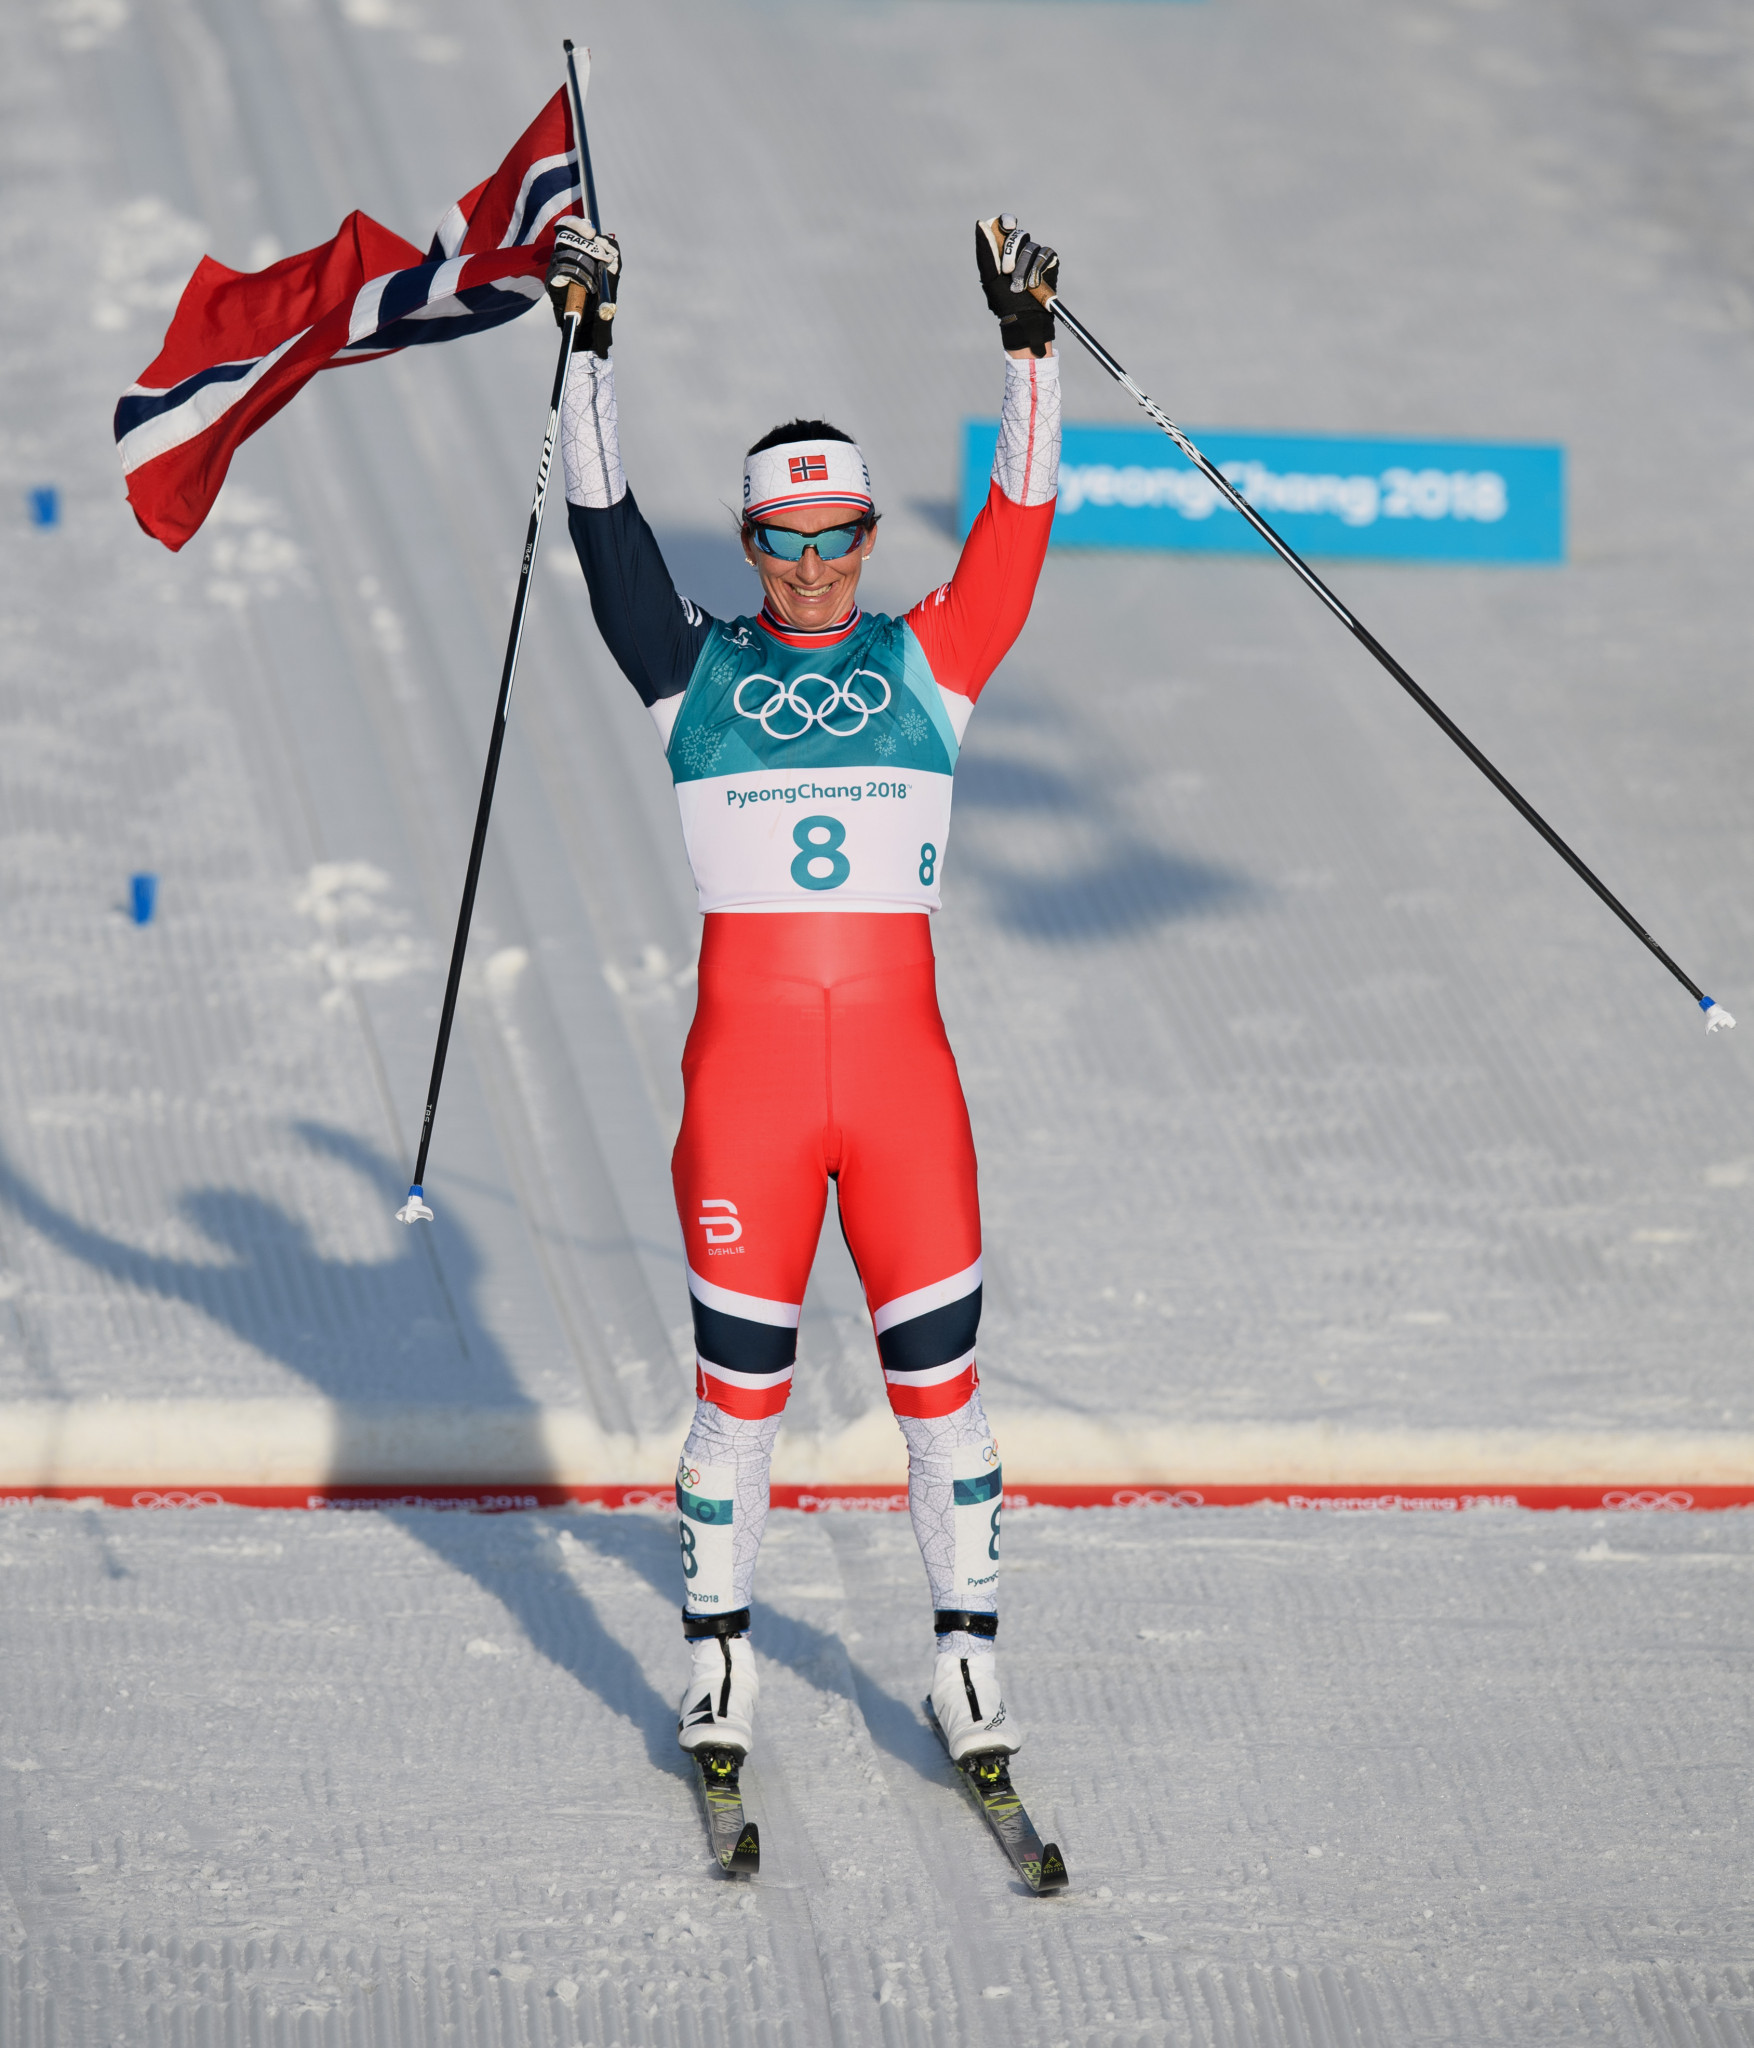 Marit Bjørgen ended a remarkable career with more success at Pyeongchang 2018 ©Getty Images